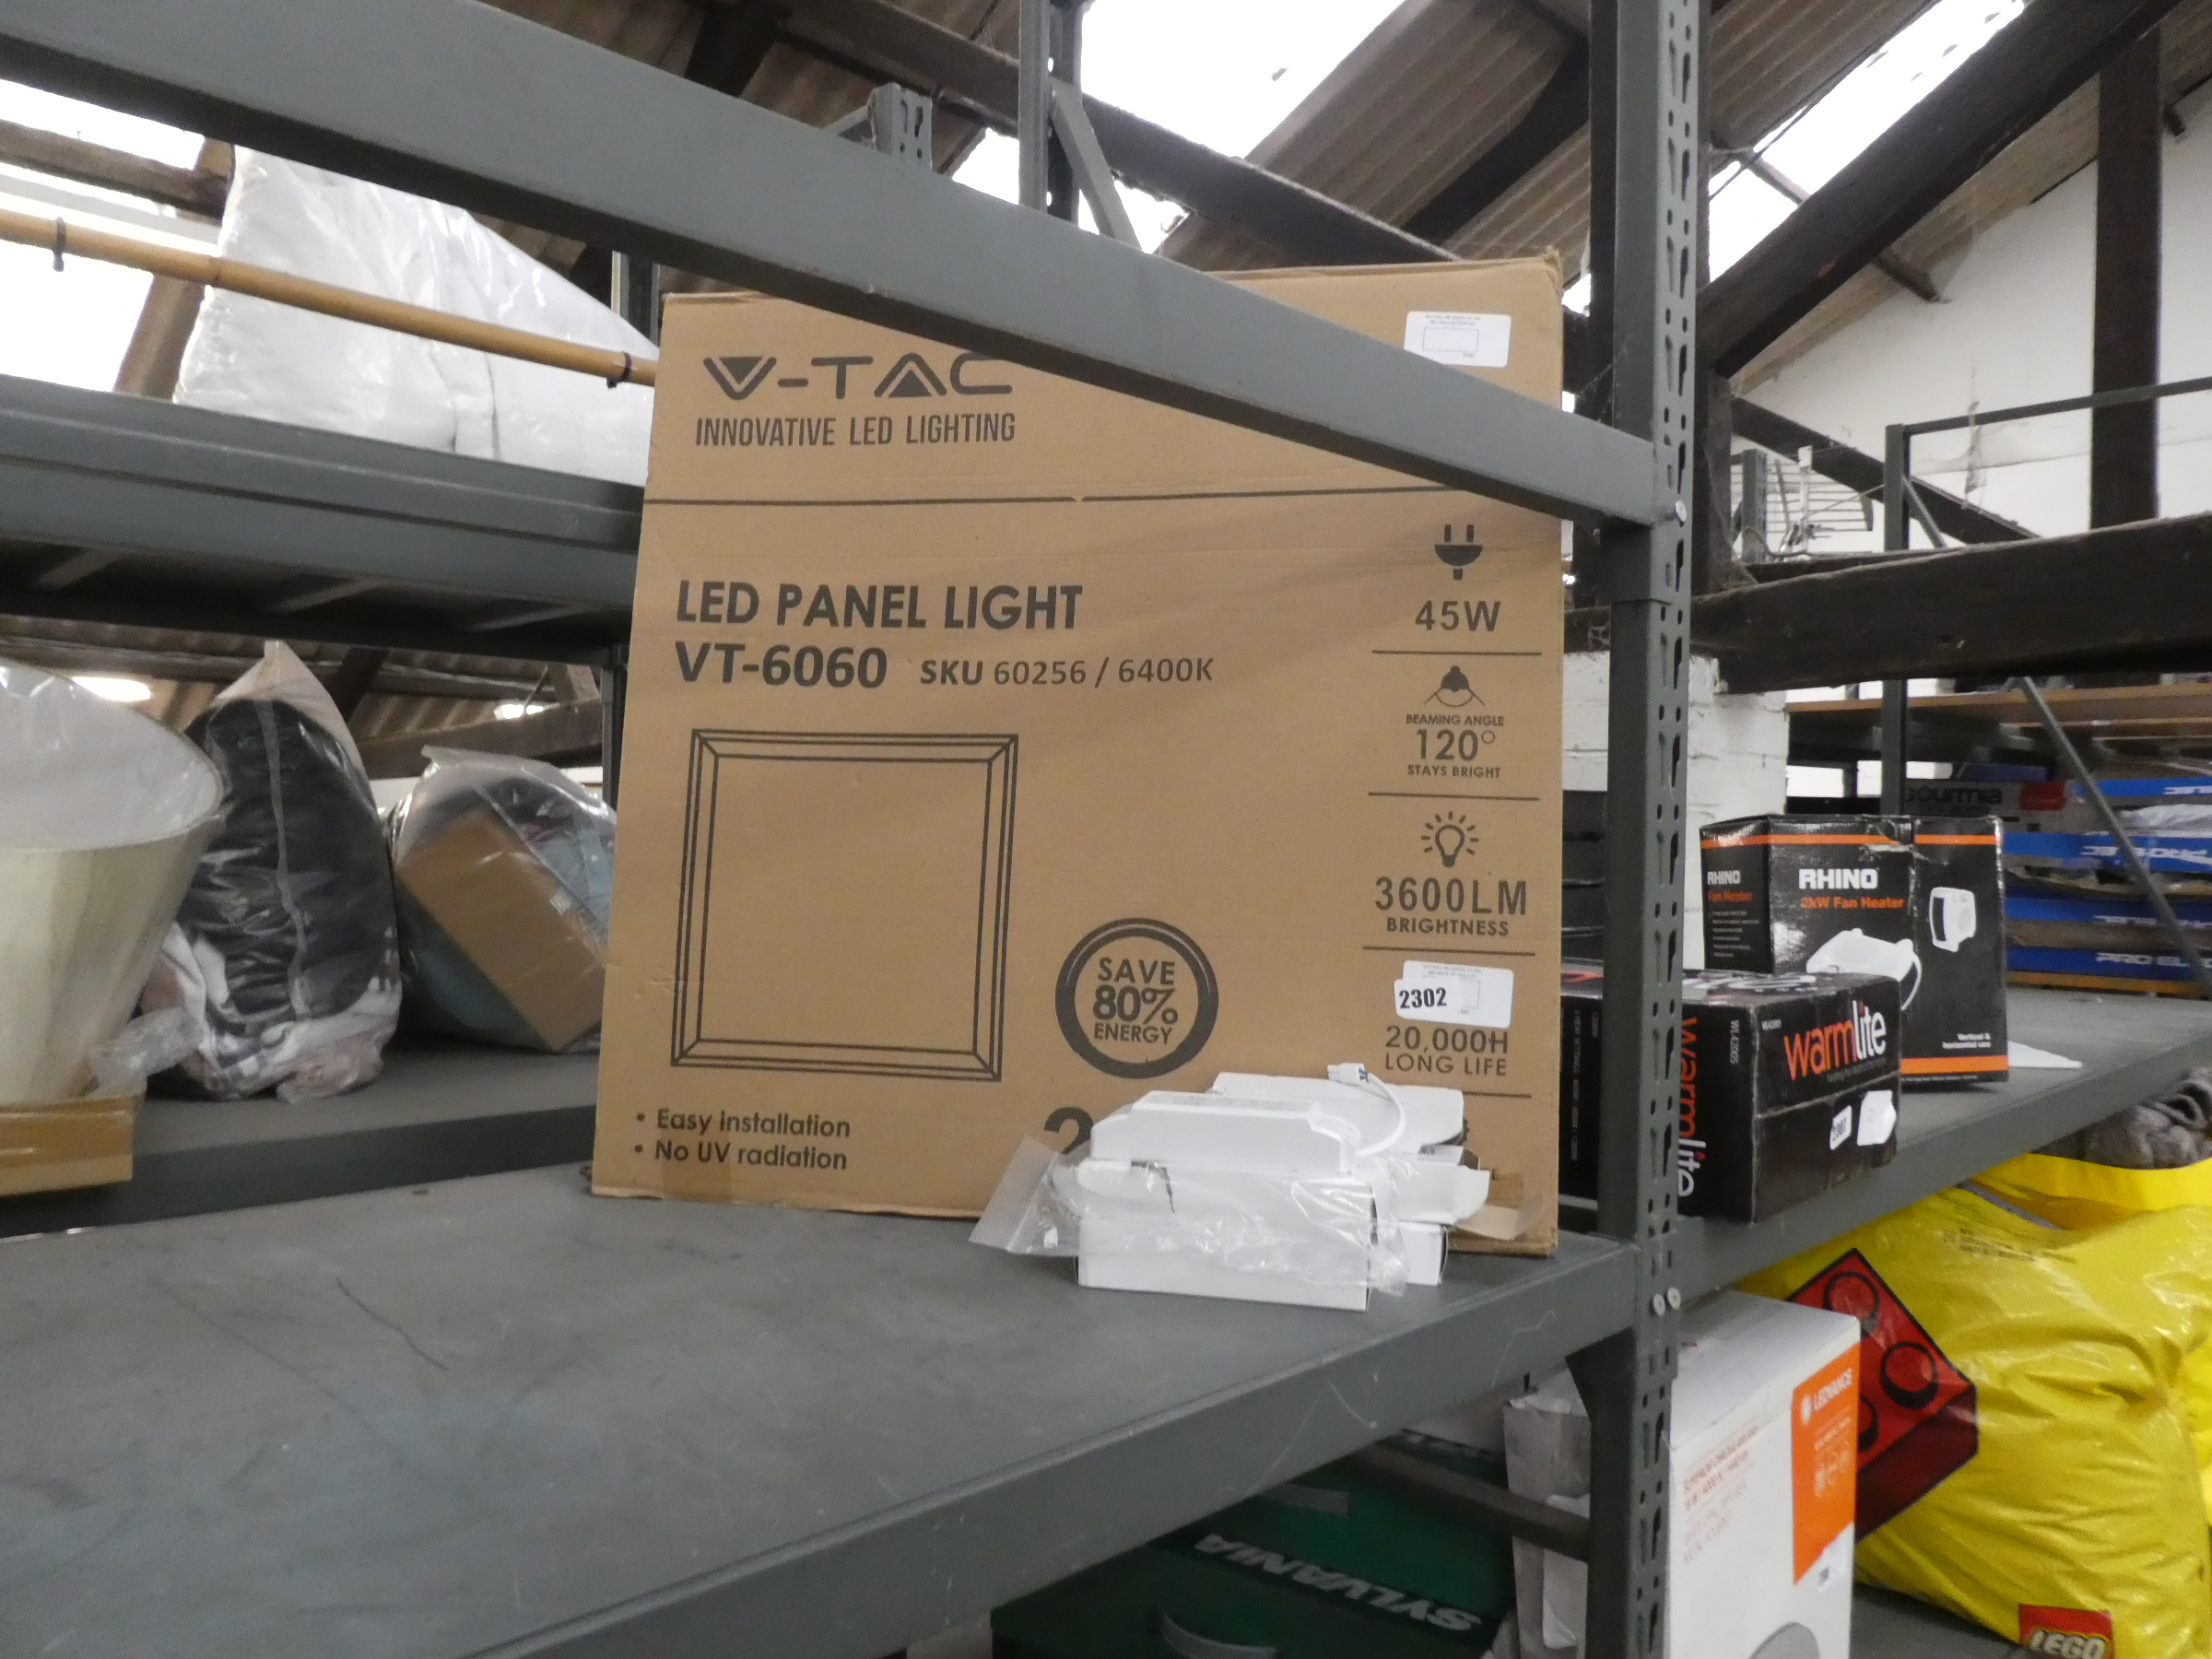 LED panel light and boxed drivers